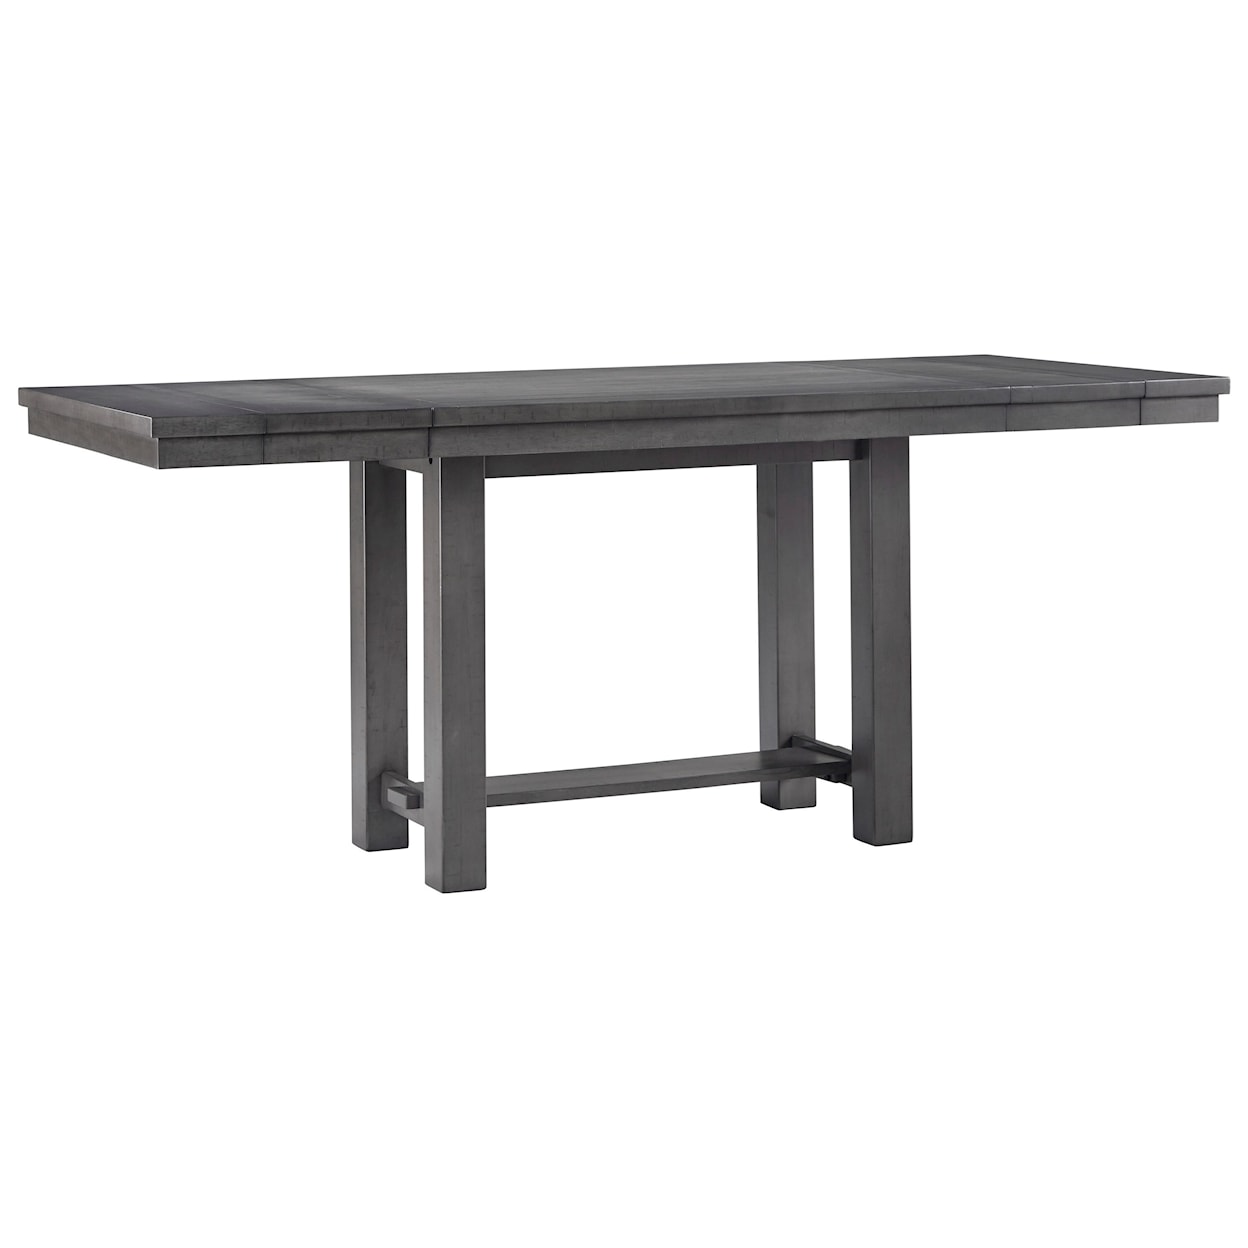 Ashley Furniture Signature Design Myshanna Counter Height Dining Extension Table